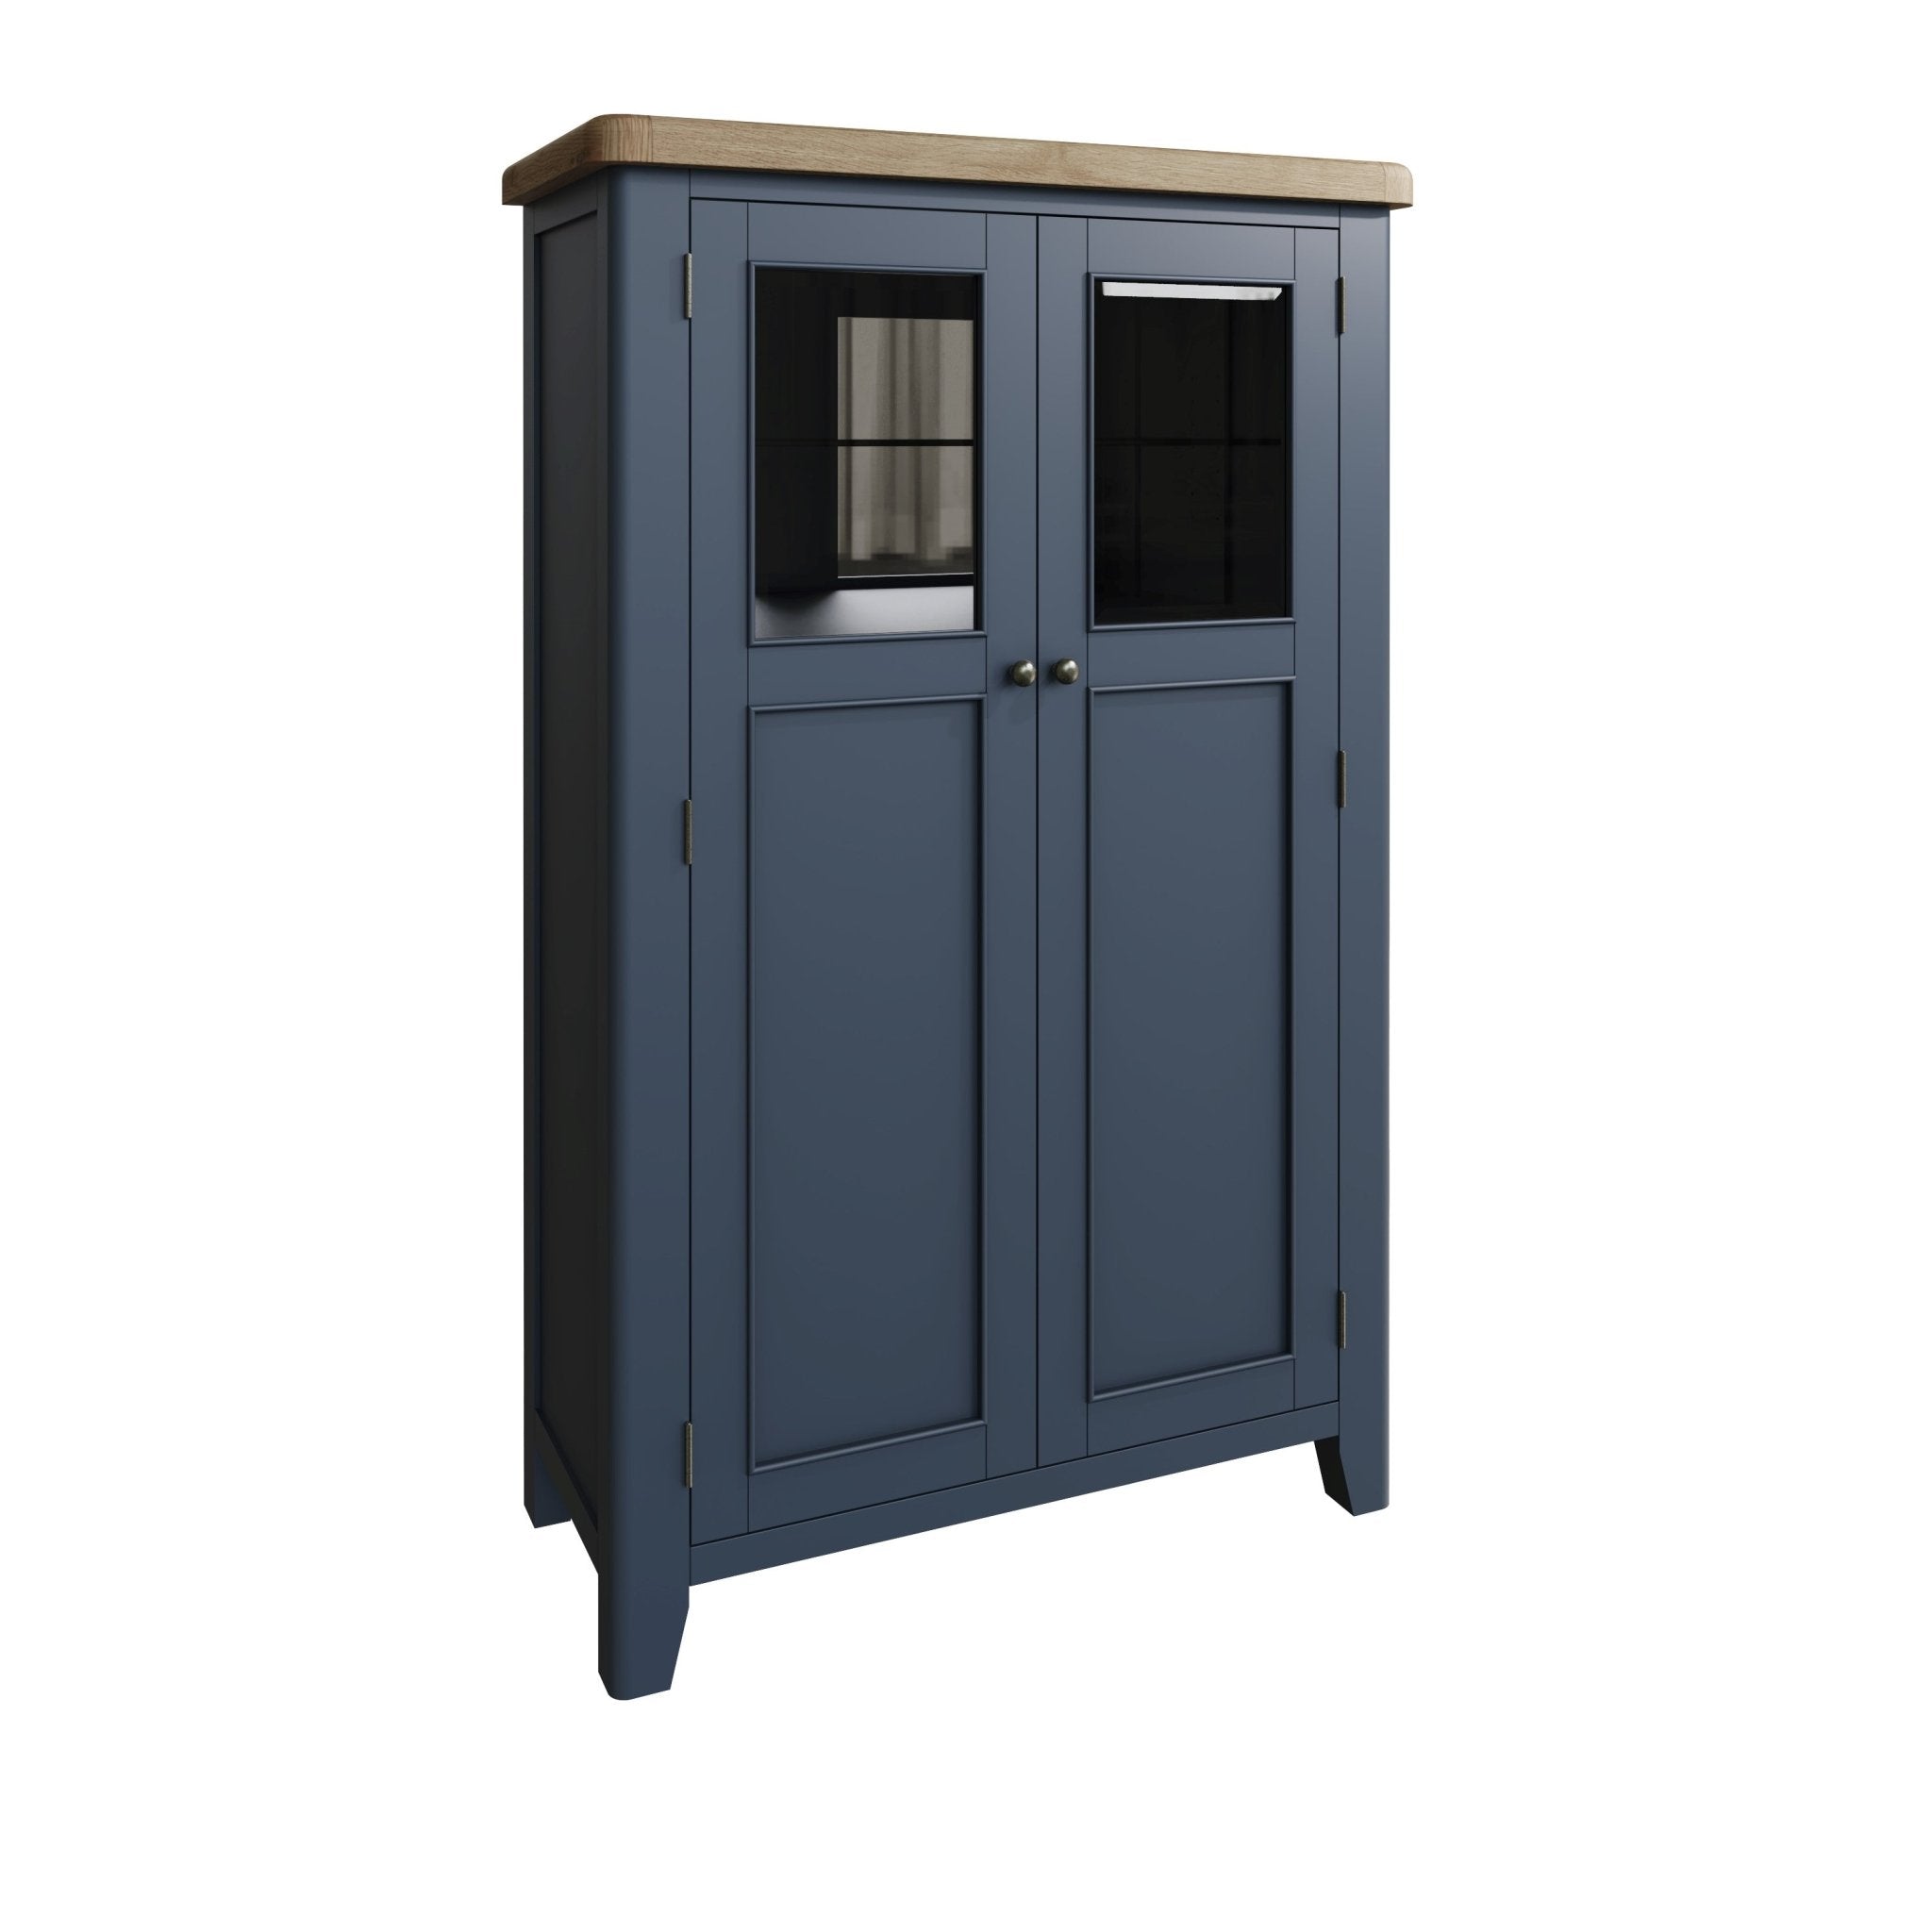 Rogate Blue Painted Drinks Cabinet Cupboard - Duck Barn Interiors